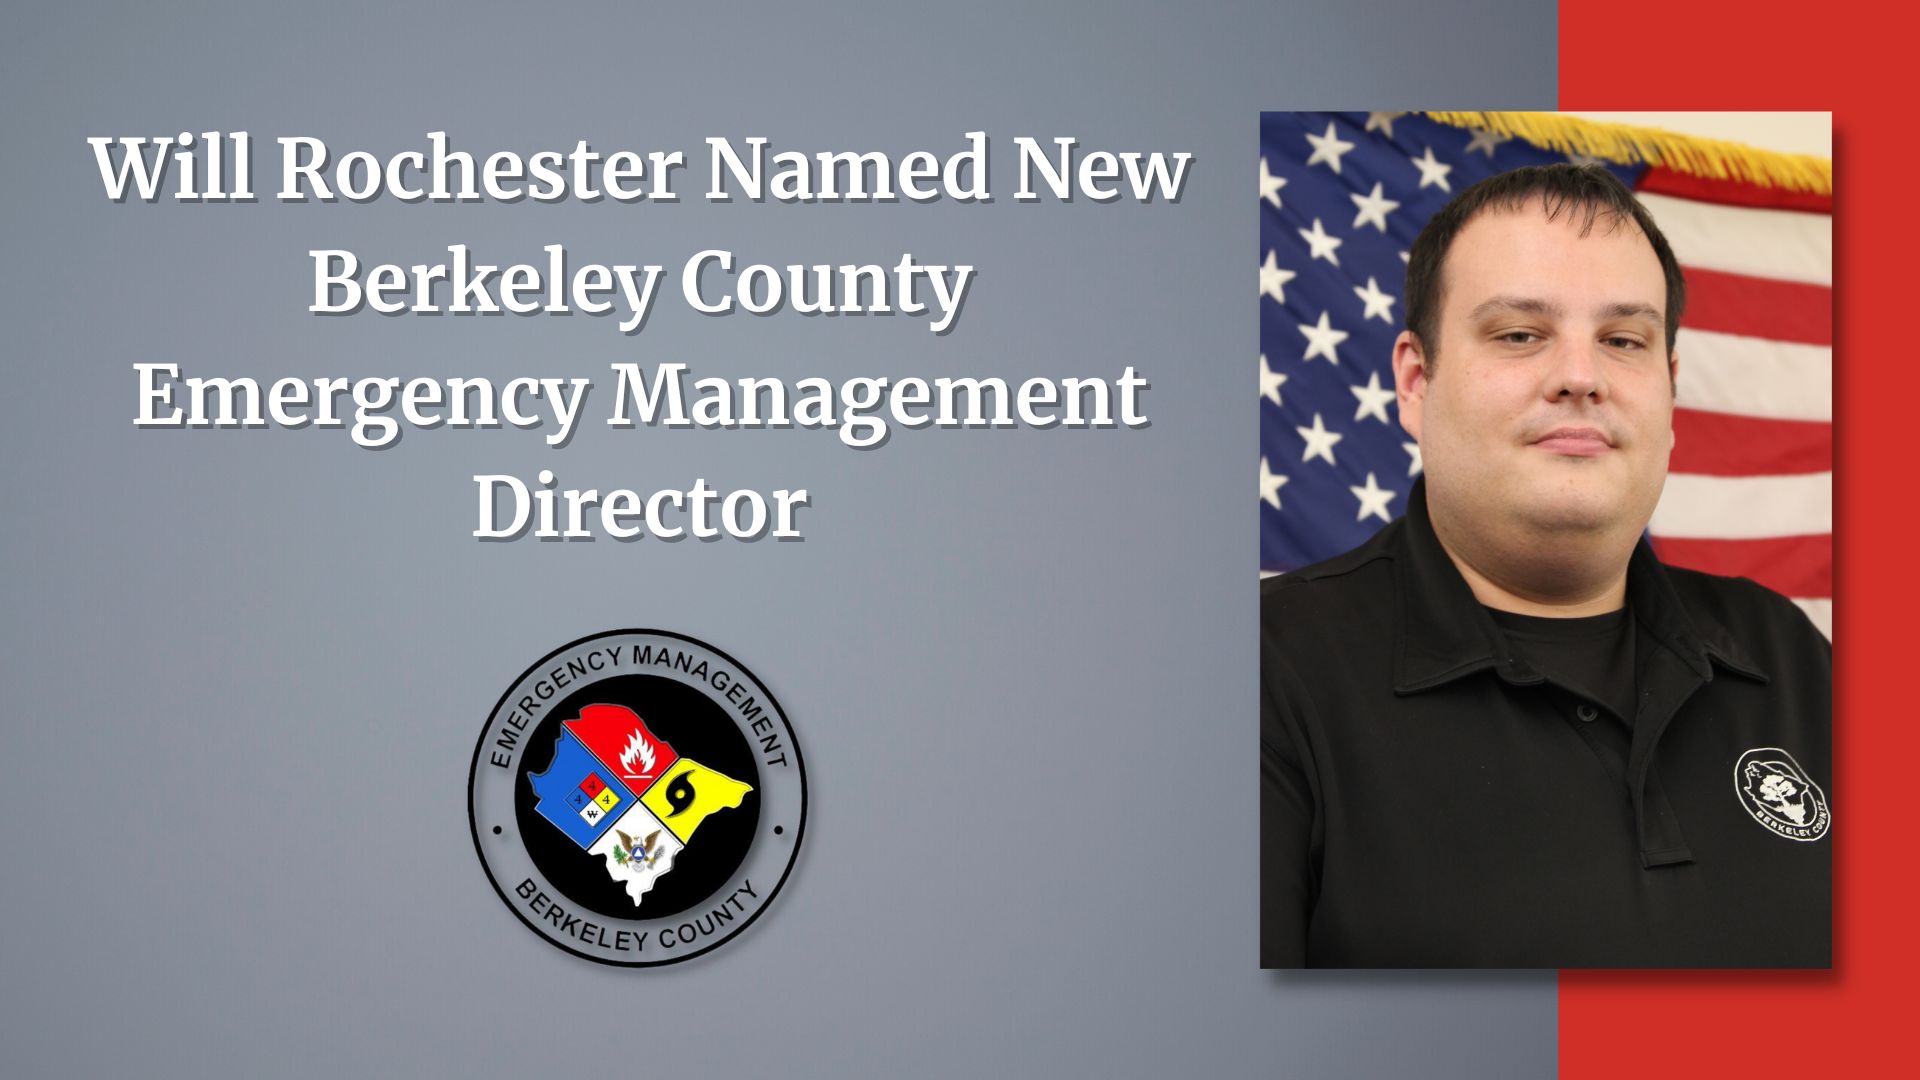 Will Rochester Named New Berkeley County Emergency Management Director